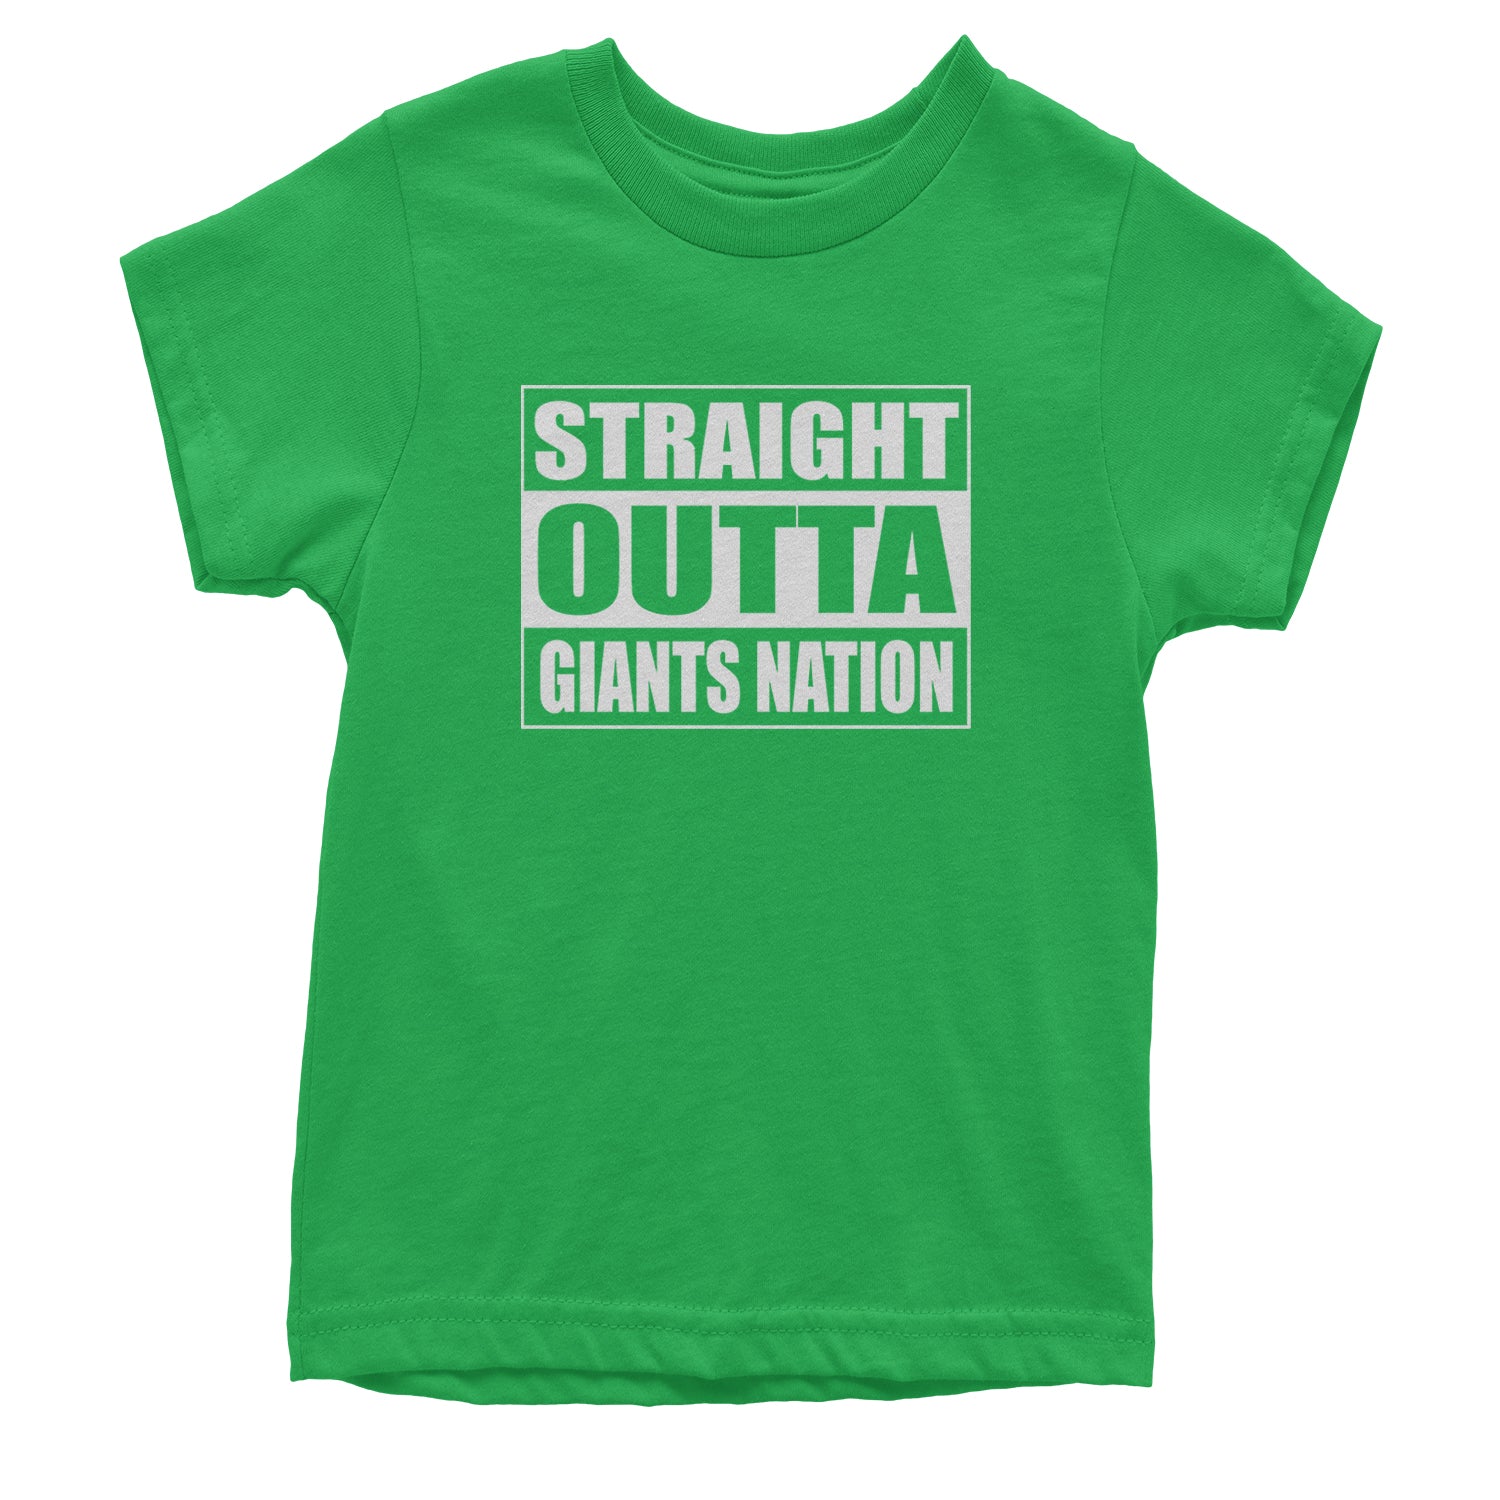 Straight Outta Giants Nation Youth T-shirt bleed, blue, football, giants, new, ny, york by Expression Tees